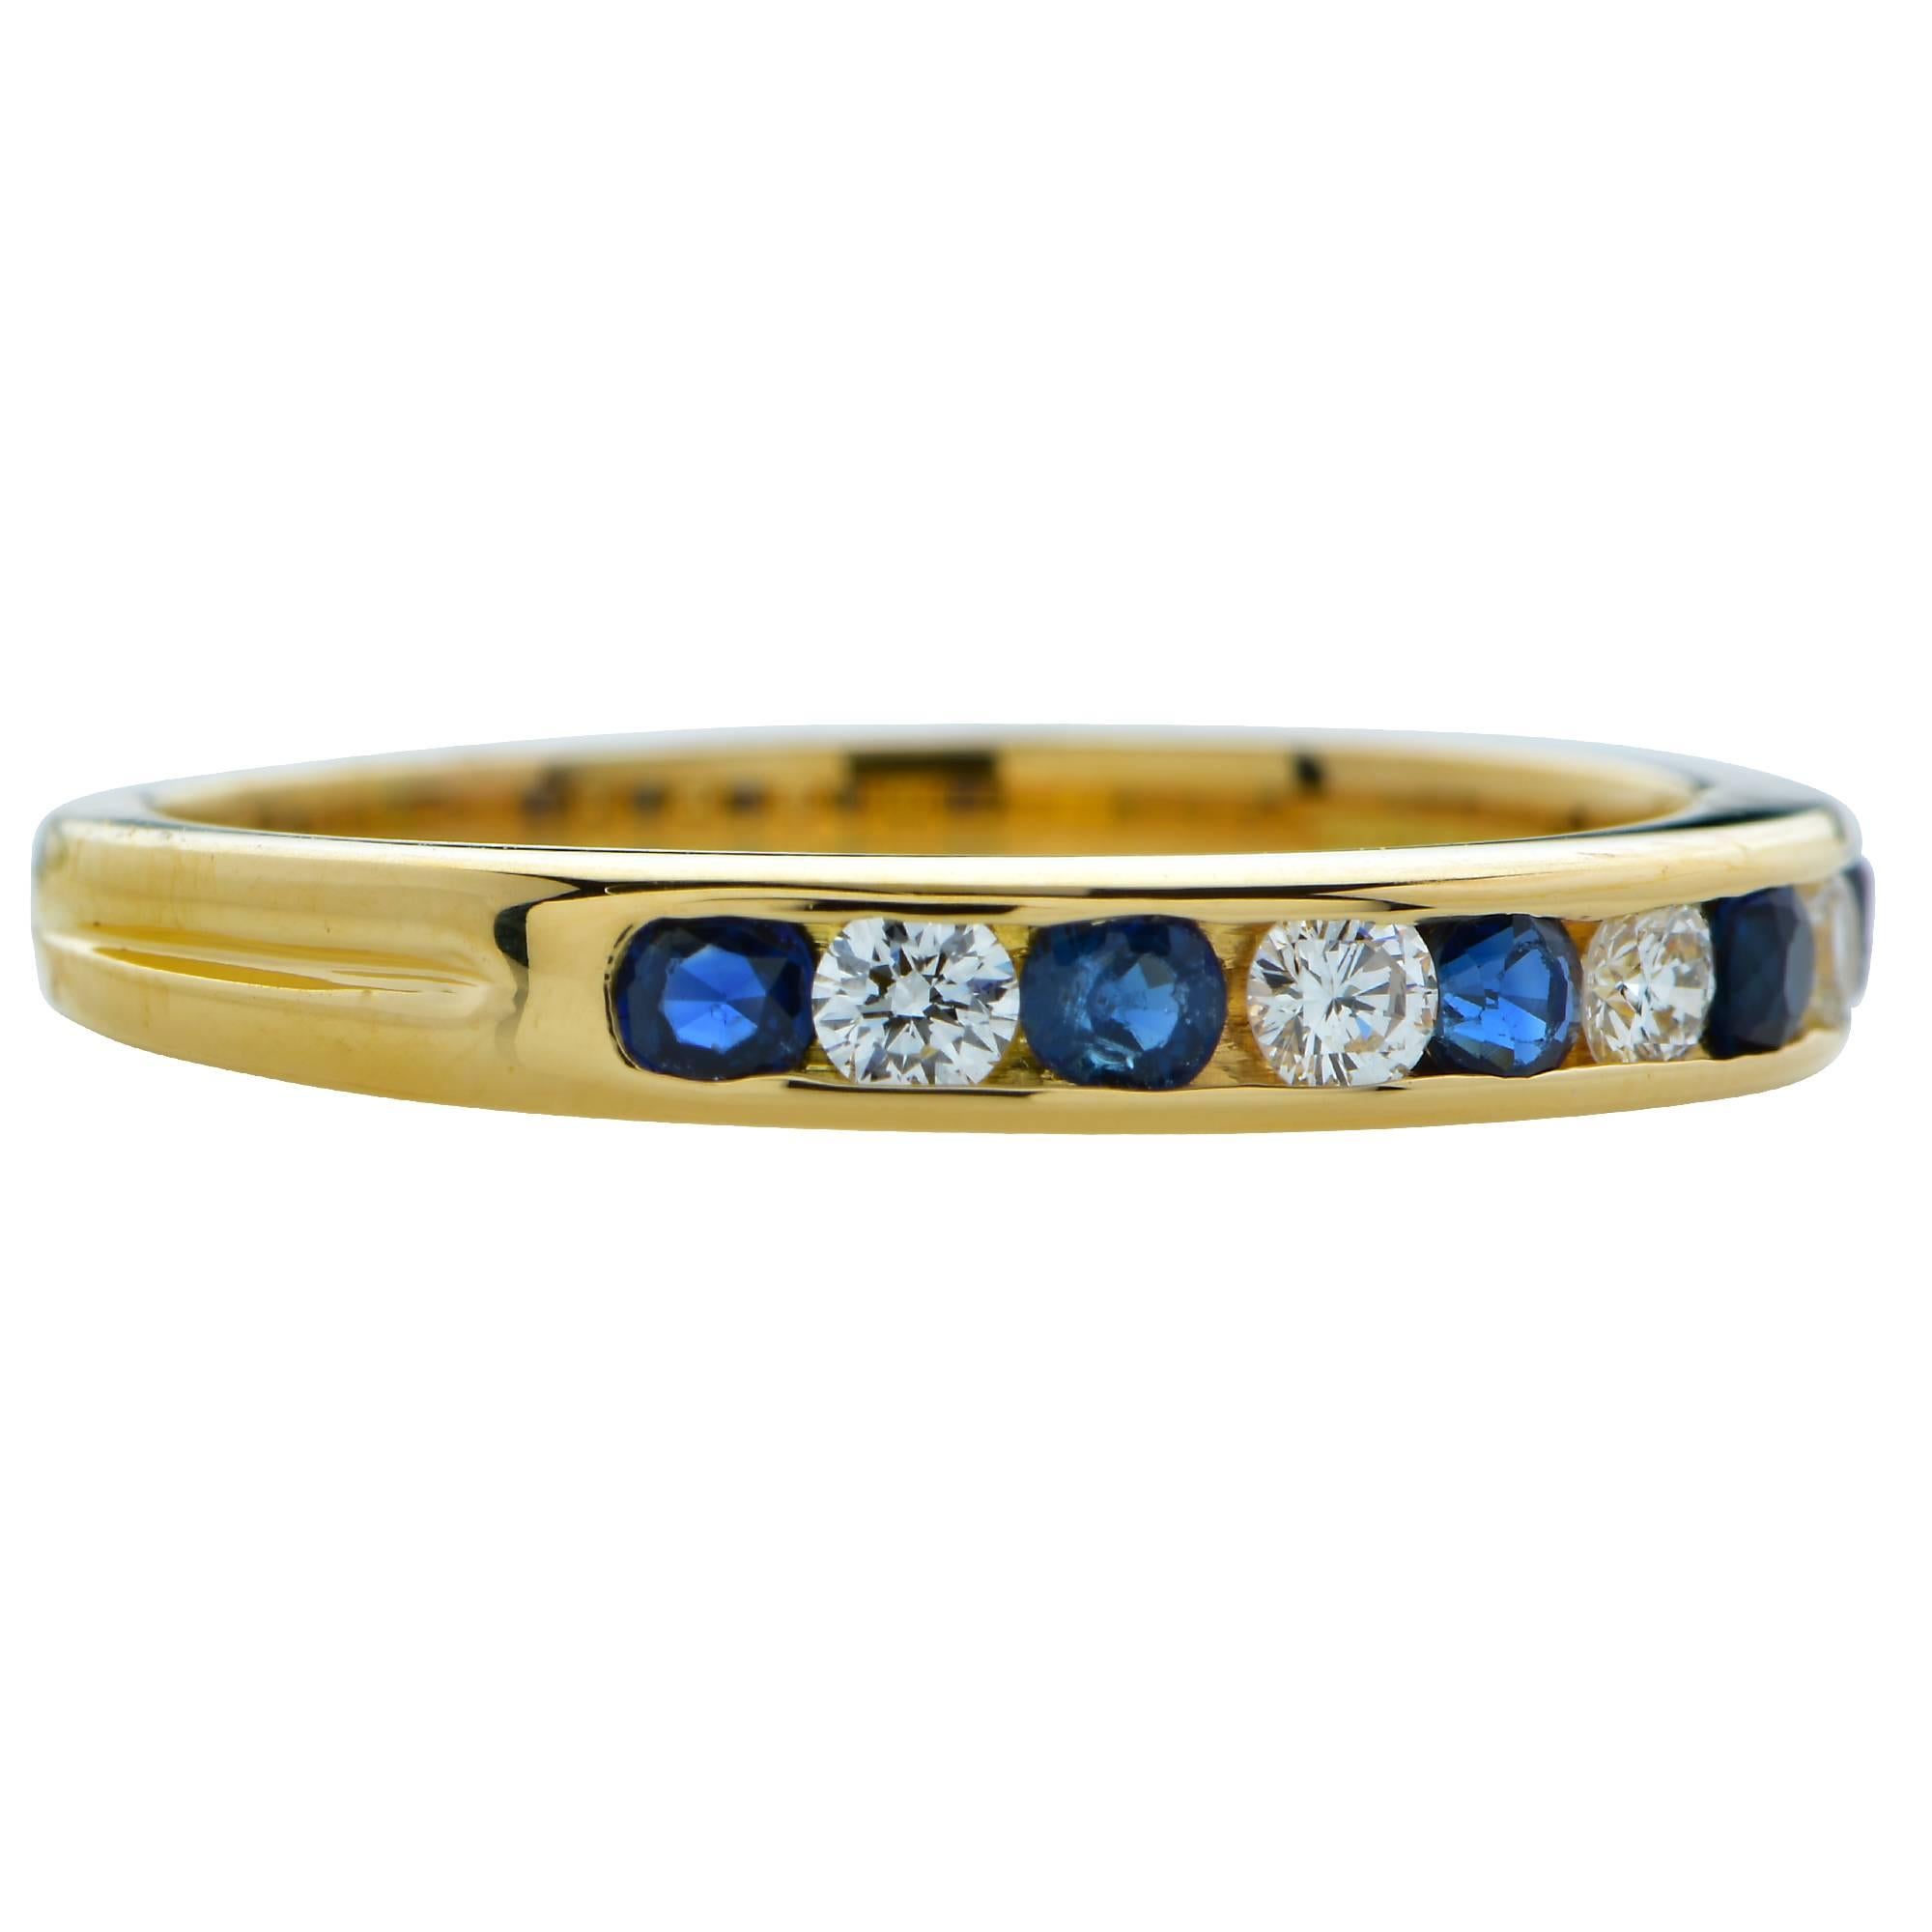 This fabulous Tiffany & Co. band is a bold and perfect complement for an everyday band. Spectacularly crafted in 18 karat yellow gold, this band exemplifies Tiffany scrupulous craftsmanship and gem selection.  This band showcases 4 channel set round